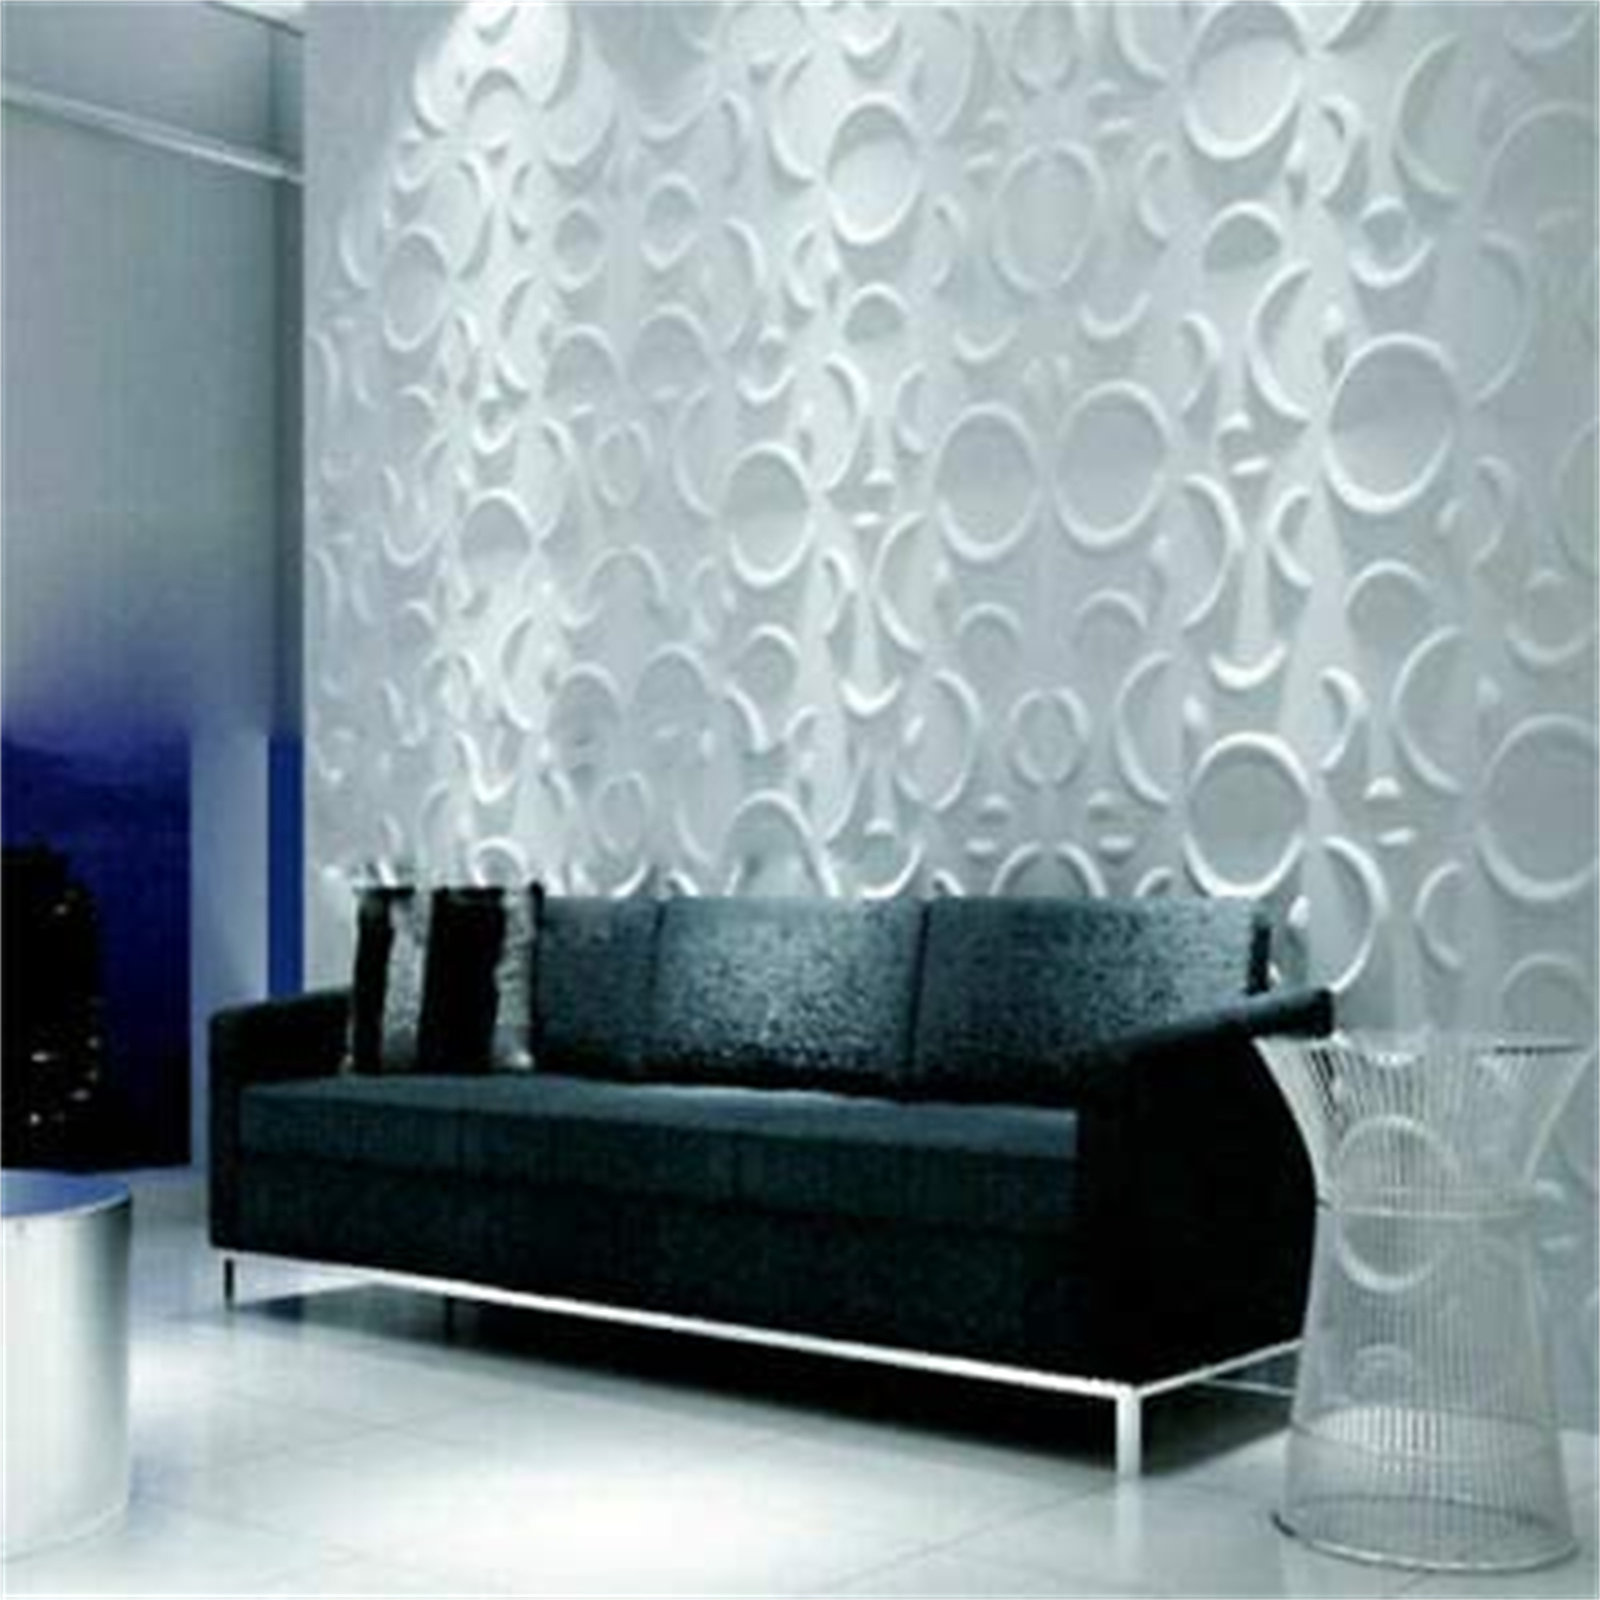 Wrought Studio 3d Wall Panels Pvc White Brick Wall Tiles For Indoor Outdoor Wall Decor Pattern 2 Wayfair